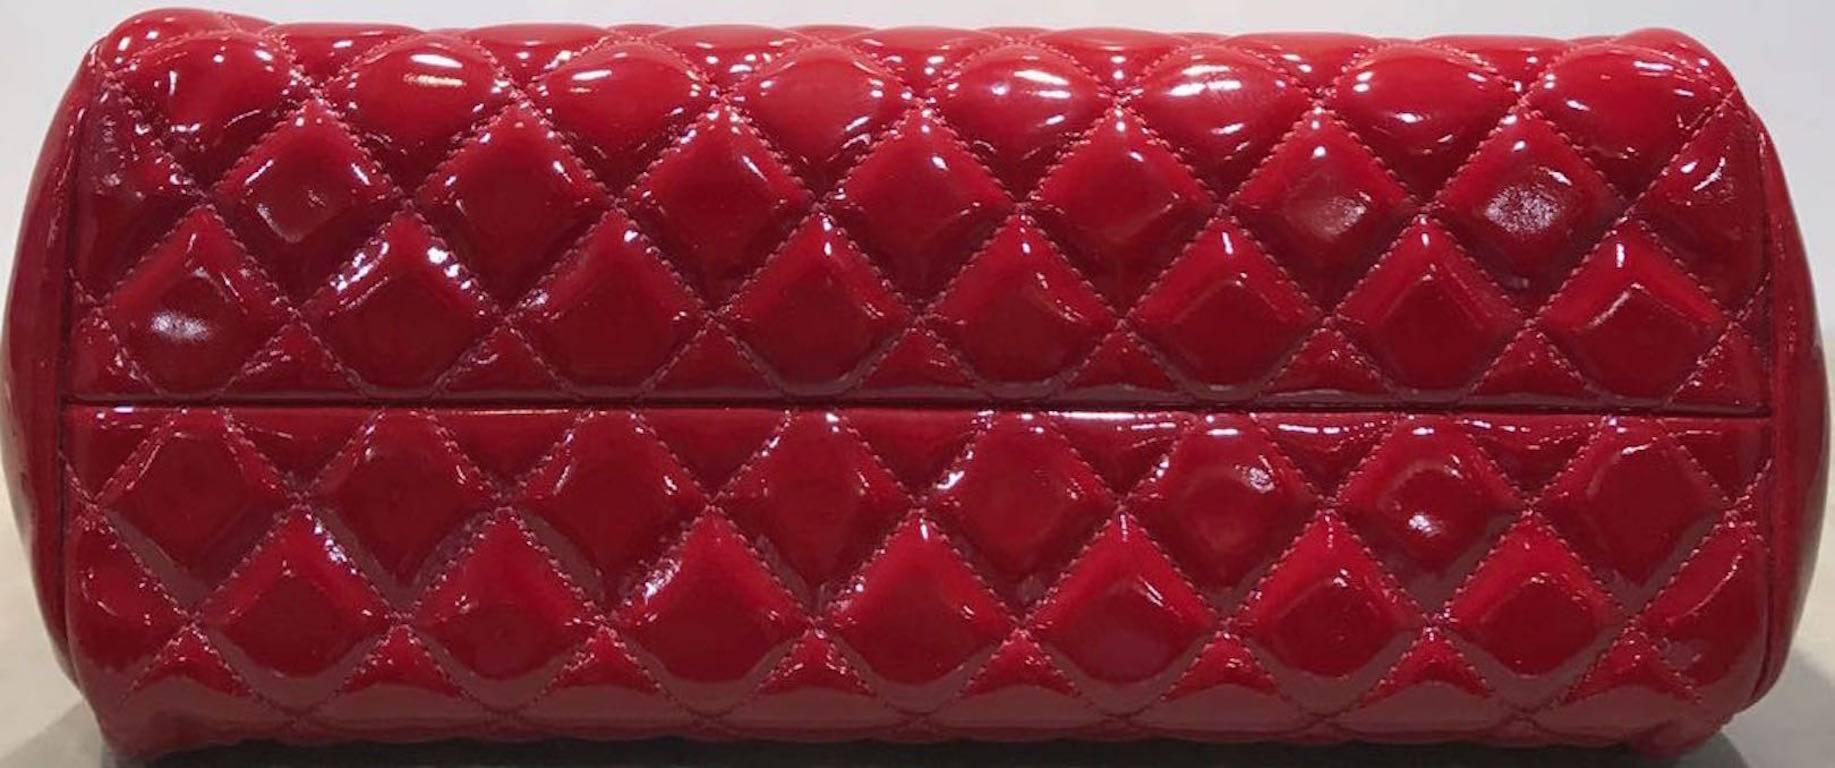 - Chanel red quilted patent leather Mademoiselle bowling bag from year of 2011. This bag is one of the popular since. Featuring signature diamond stitch pattern with interlocking silver toned "CC" logo charm. The middle compartment has a